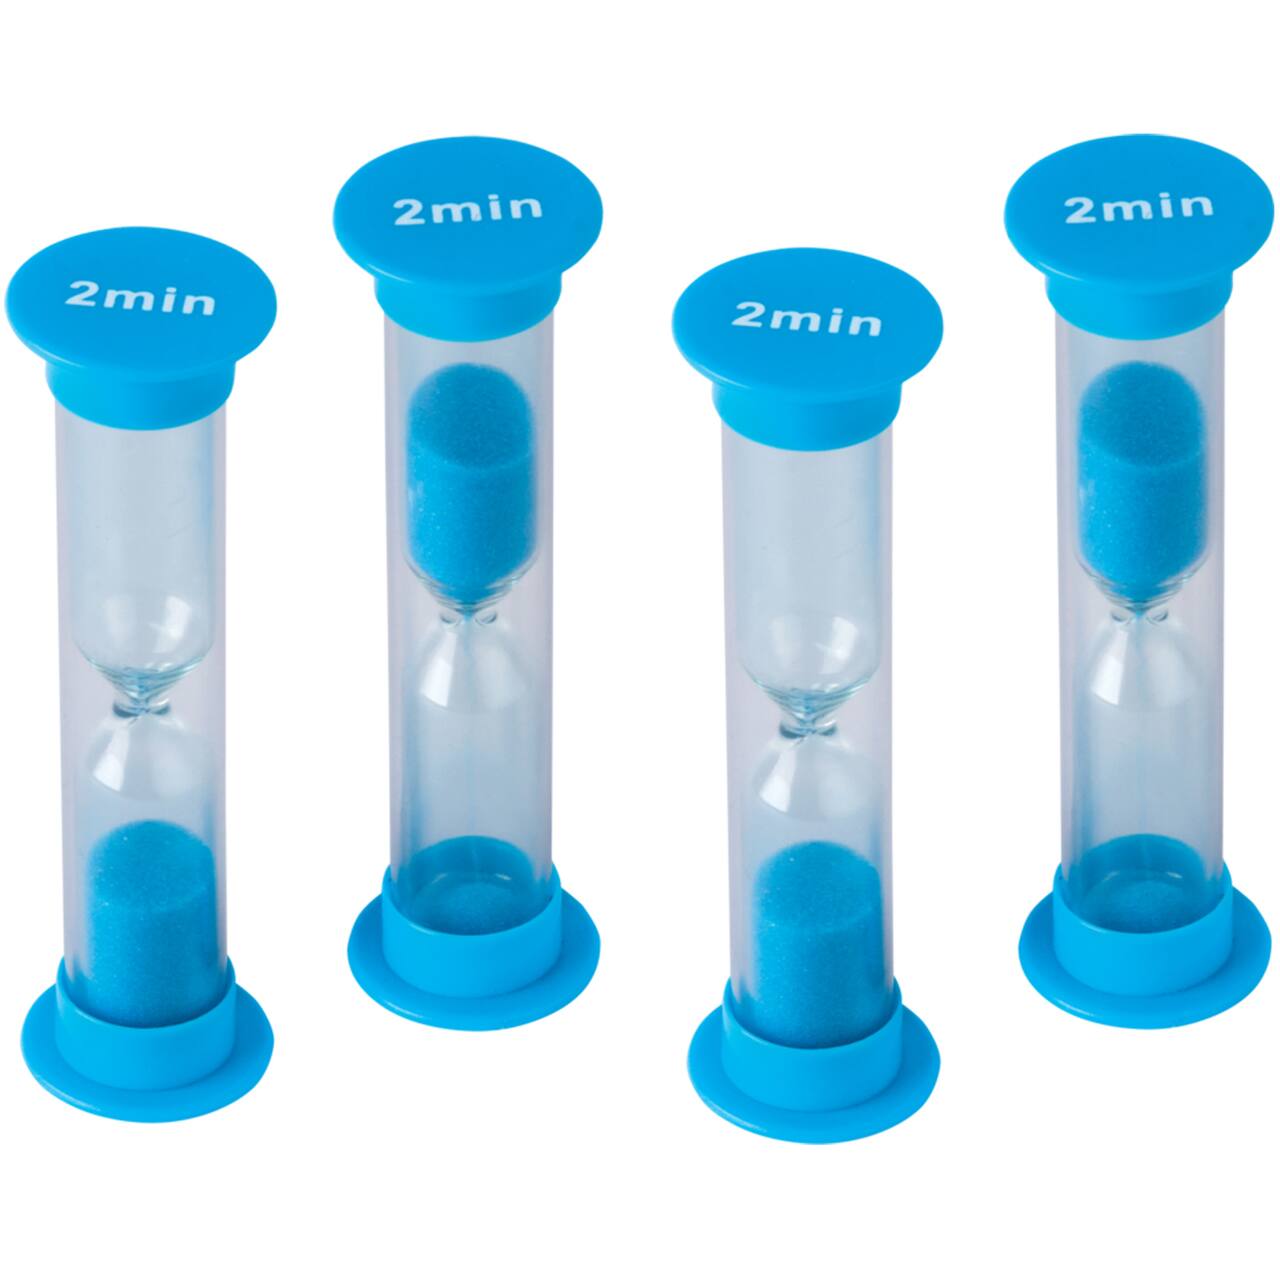 4 Small Blue 2-Minute Sand Timers, 5 Packs